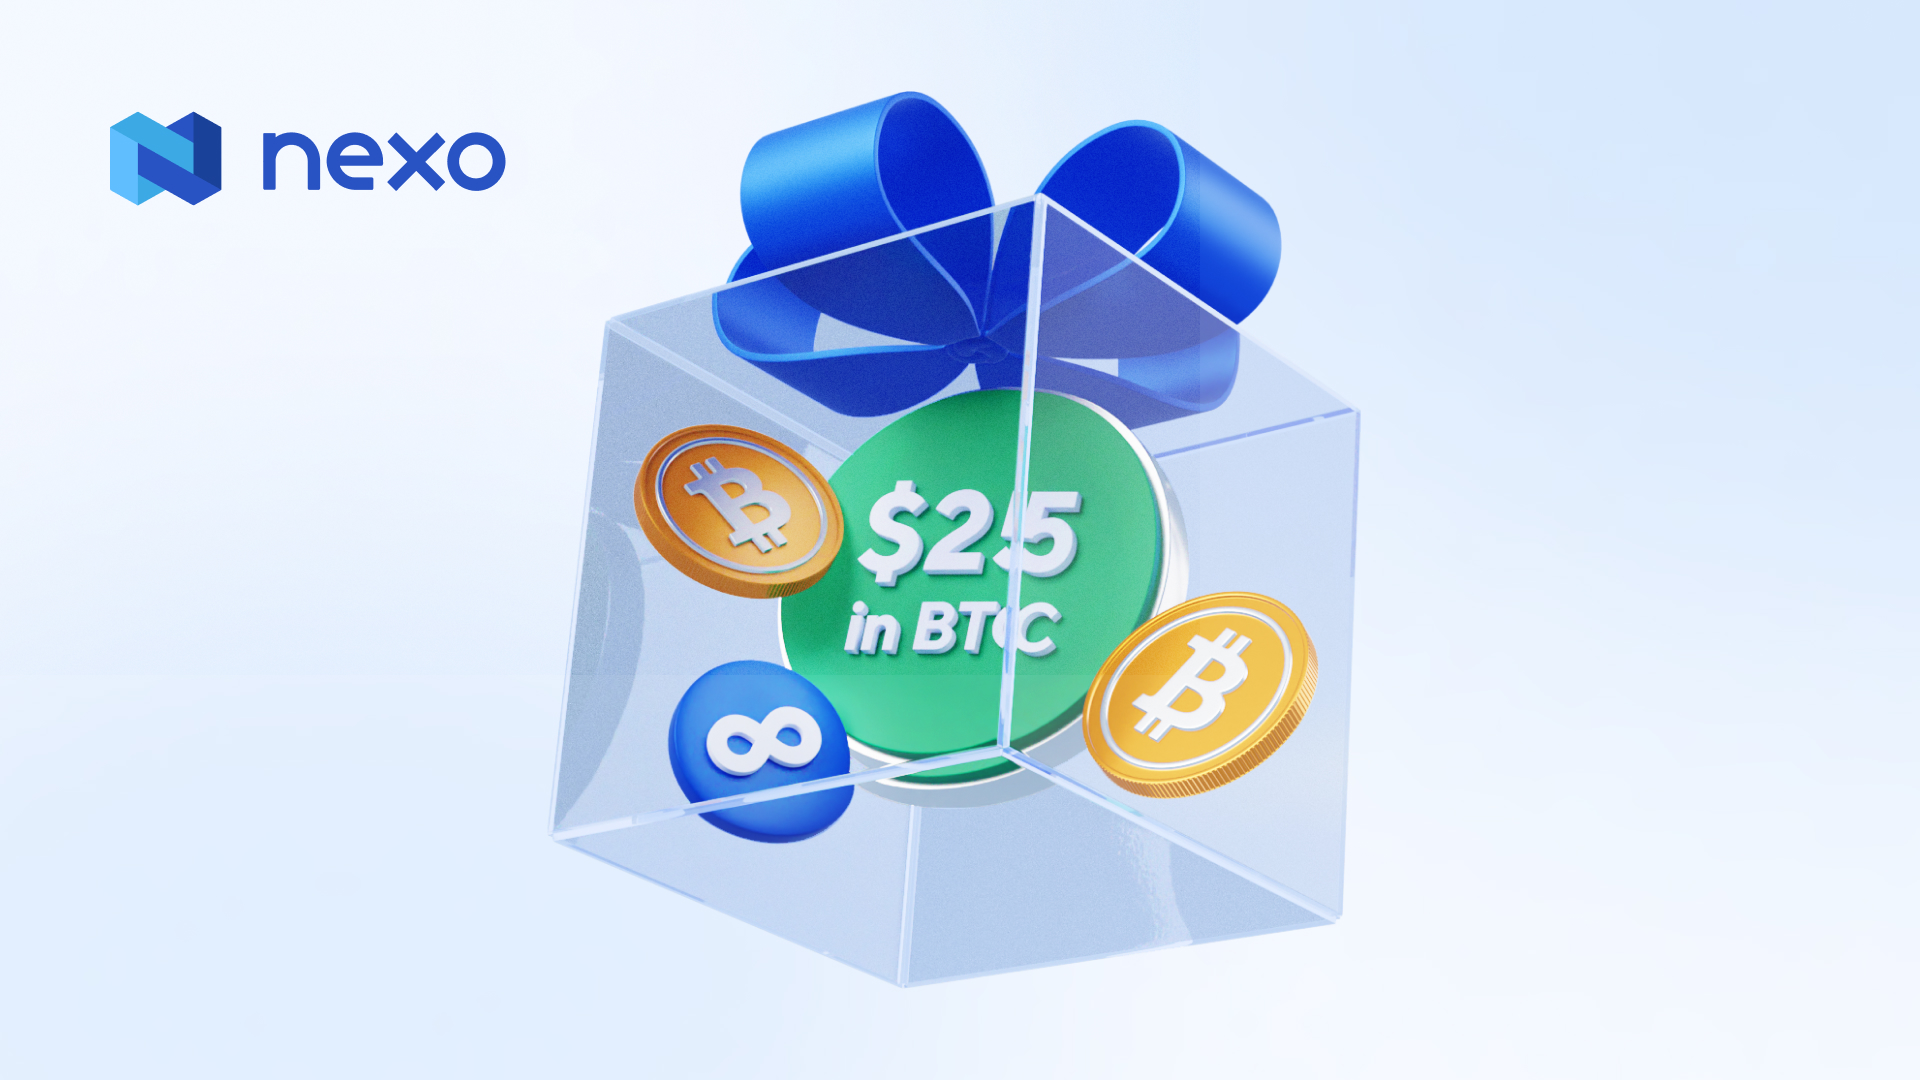 The Referral Program: $25 in BTC for Every Friend That Joins Nexo